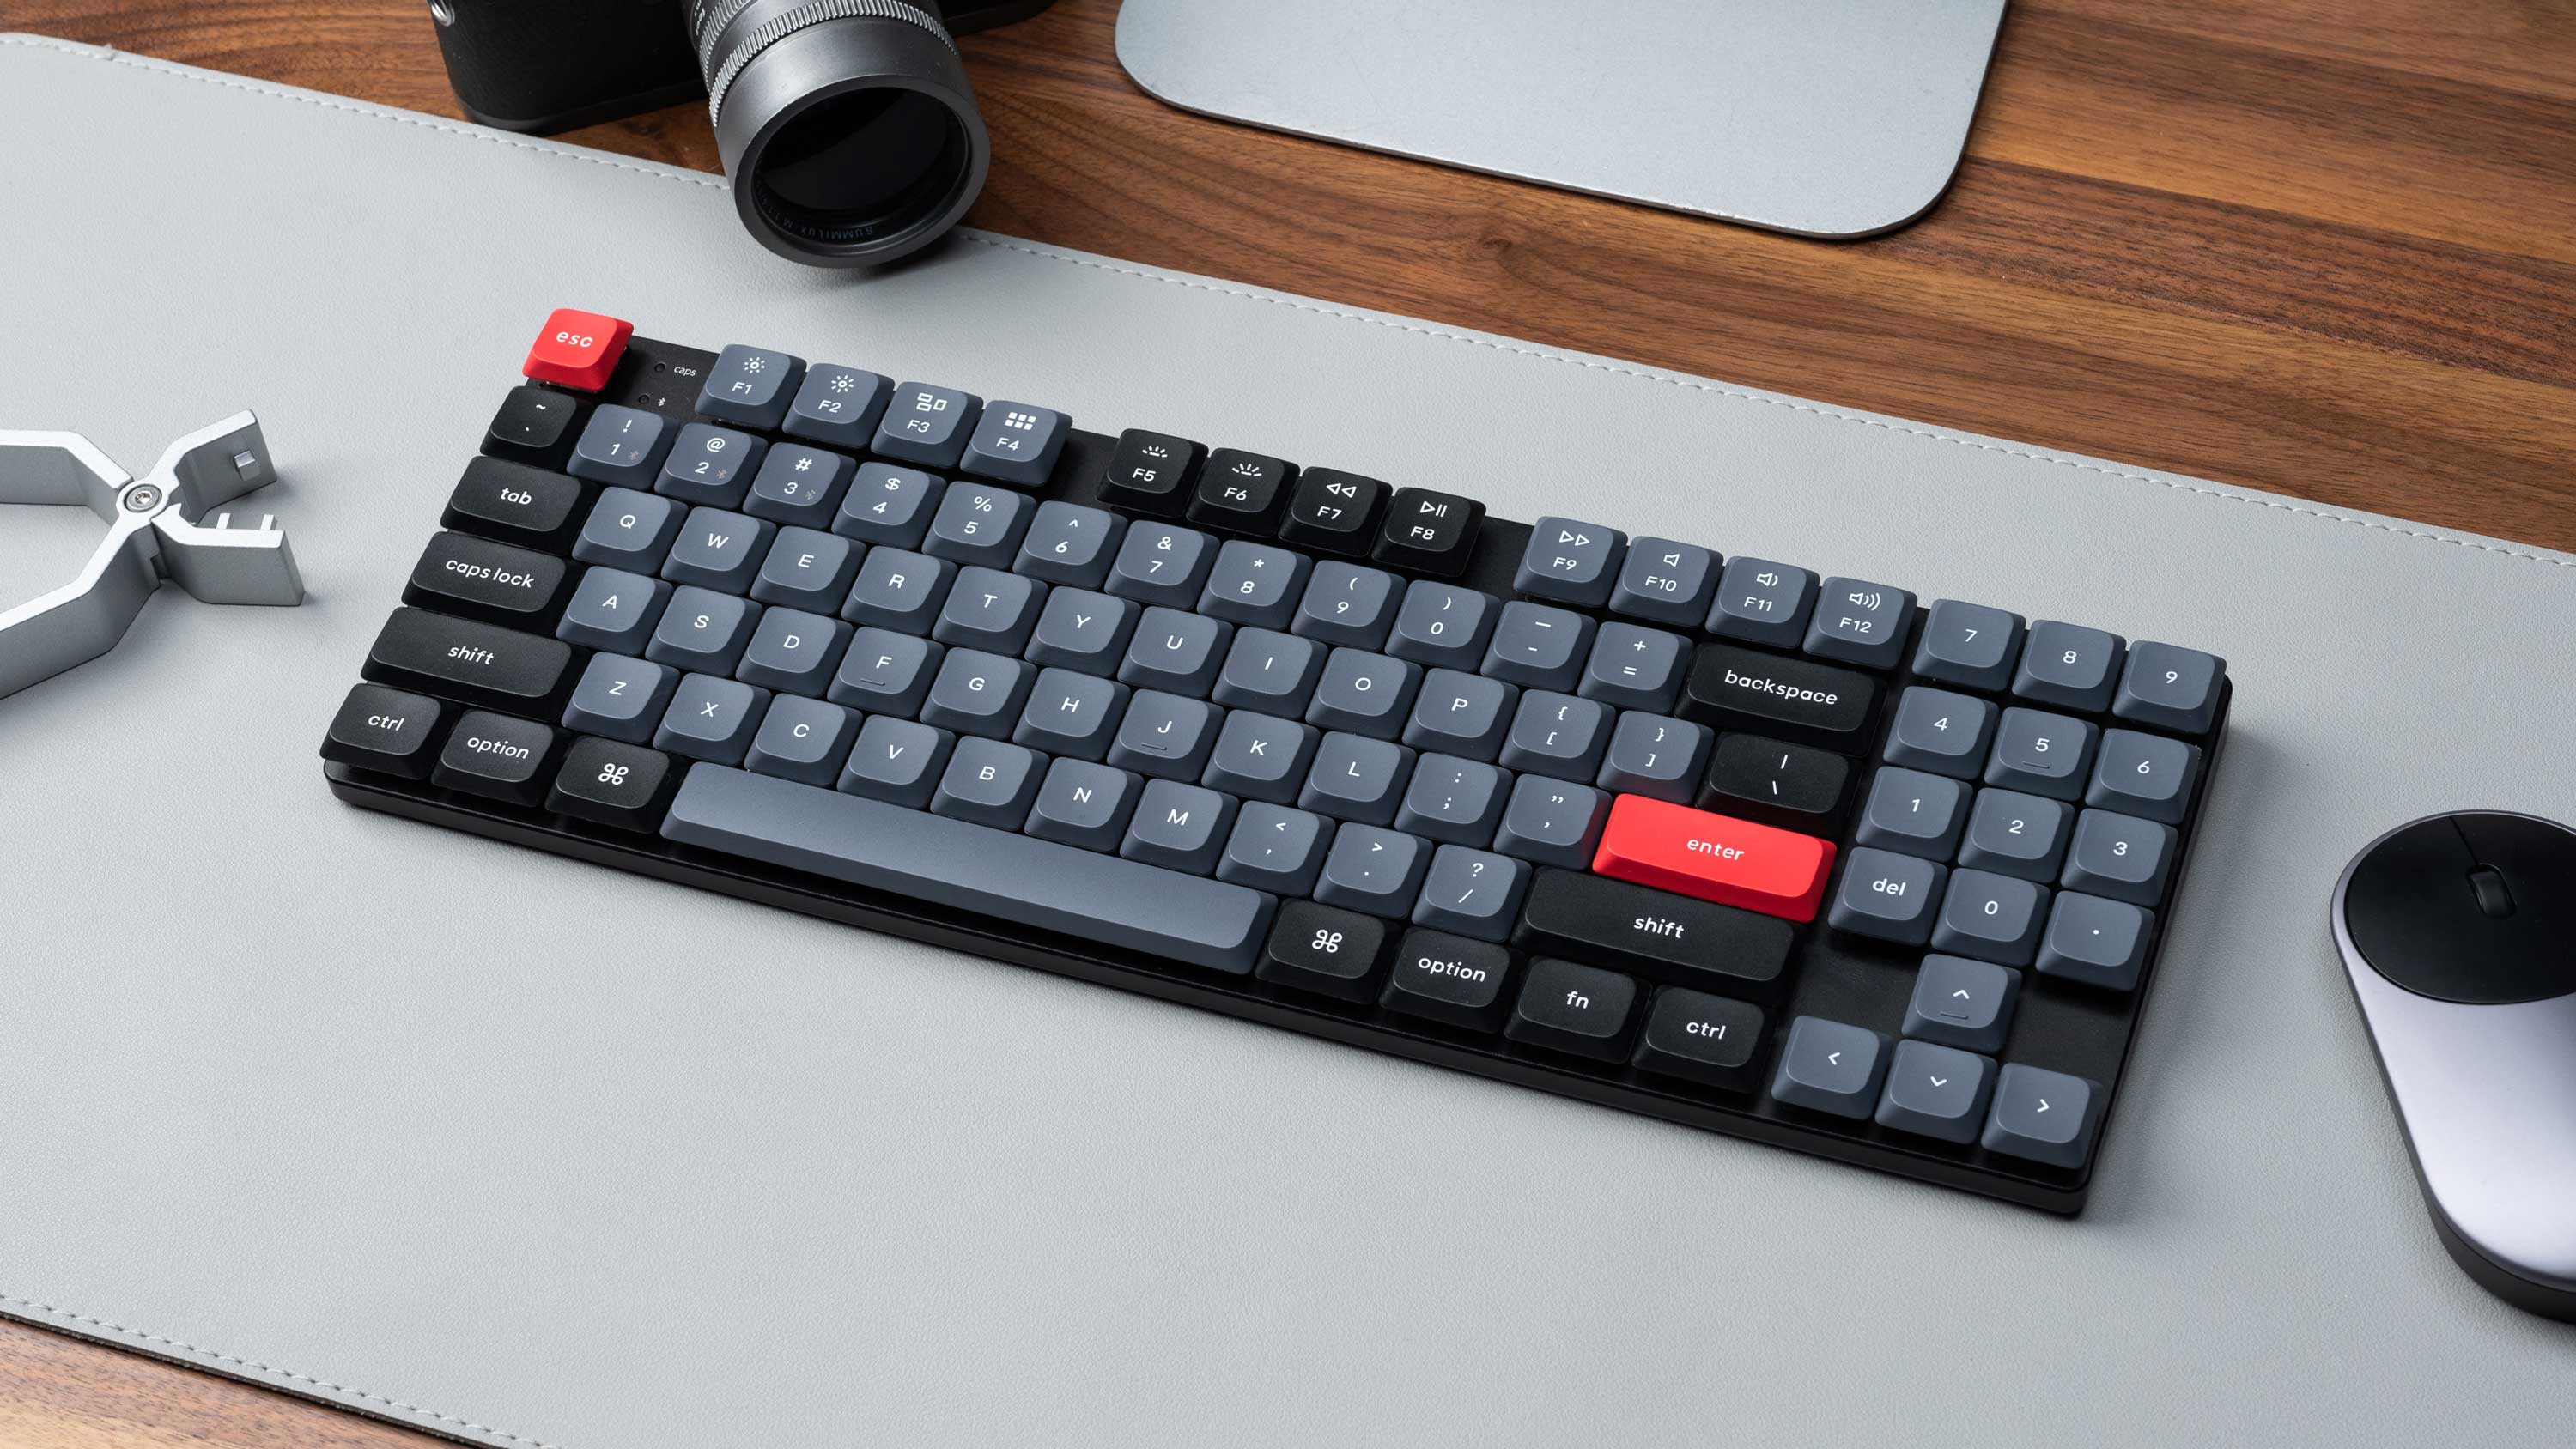 Keychron K13 Pro QMK/VIA Low-Profile Wireless Mechanical Keyboard with an ultra-slim body and hot-swappable